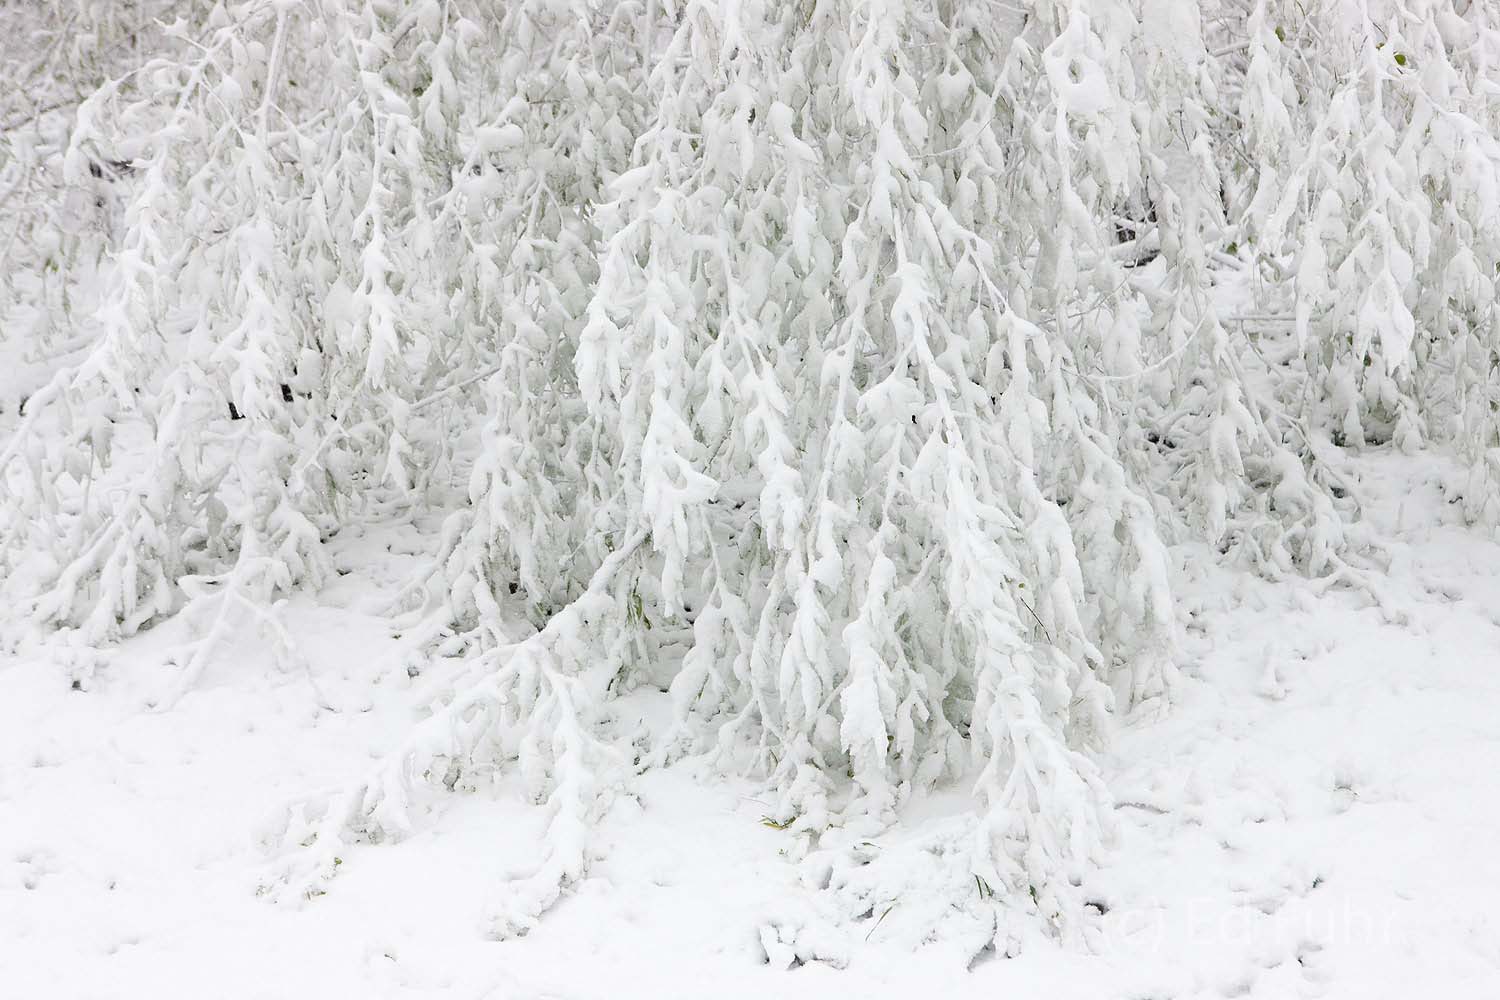 This young evergreen bows under the weight of a heavy wet snow.